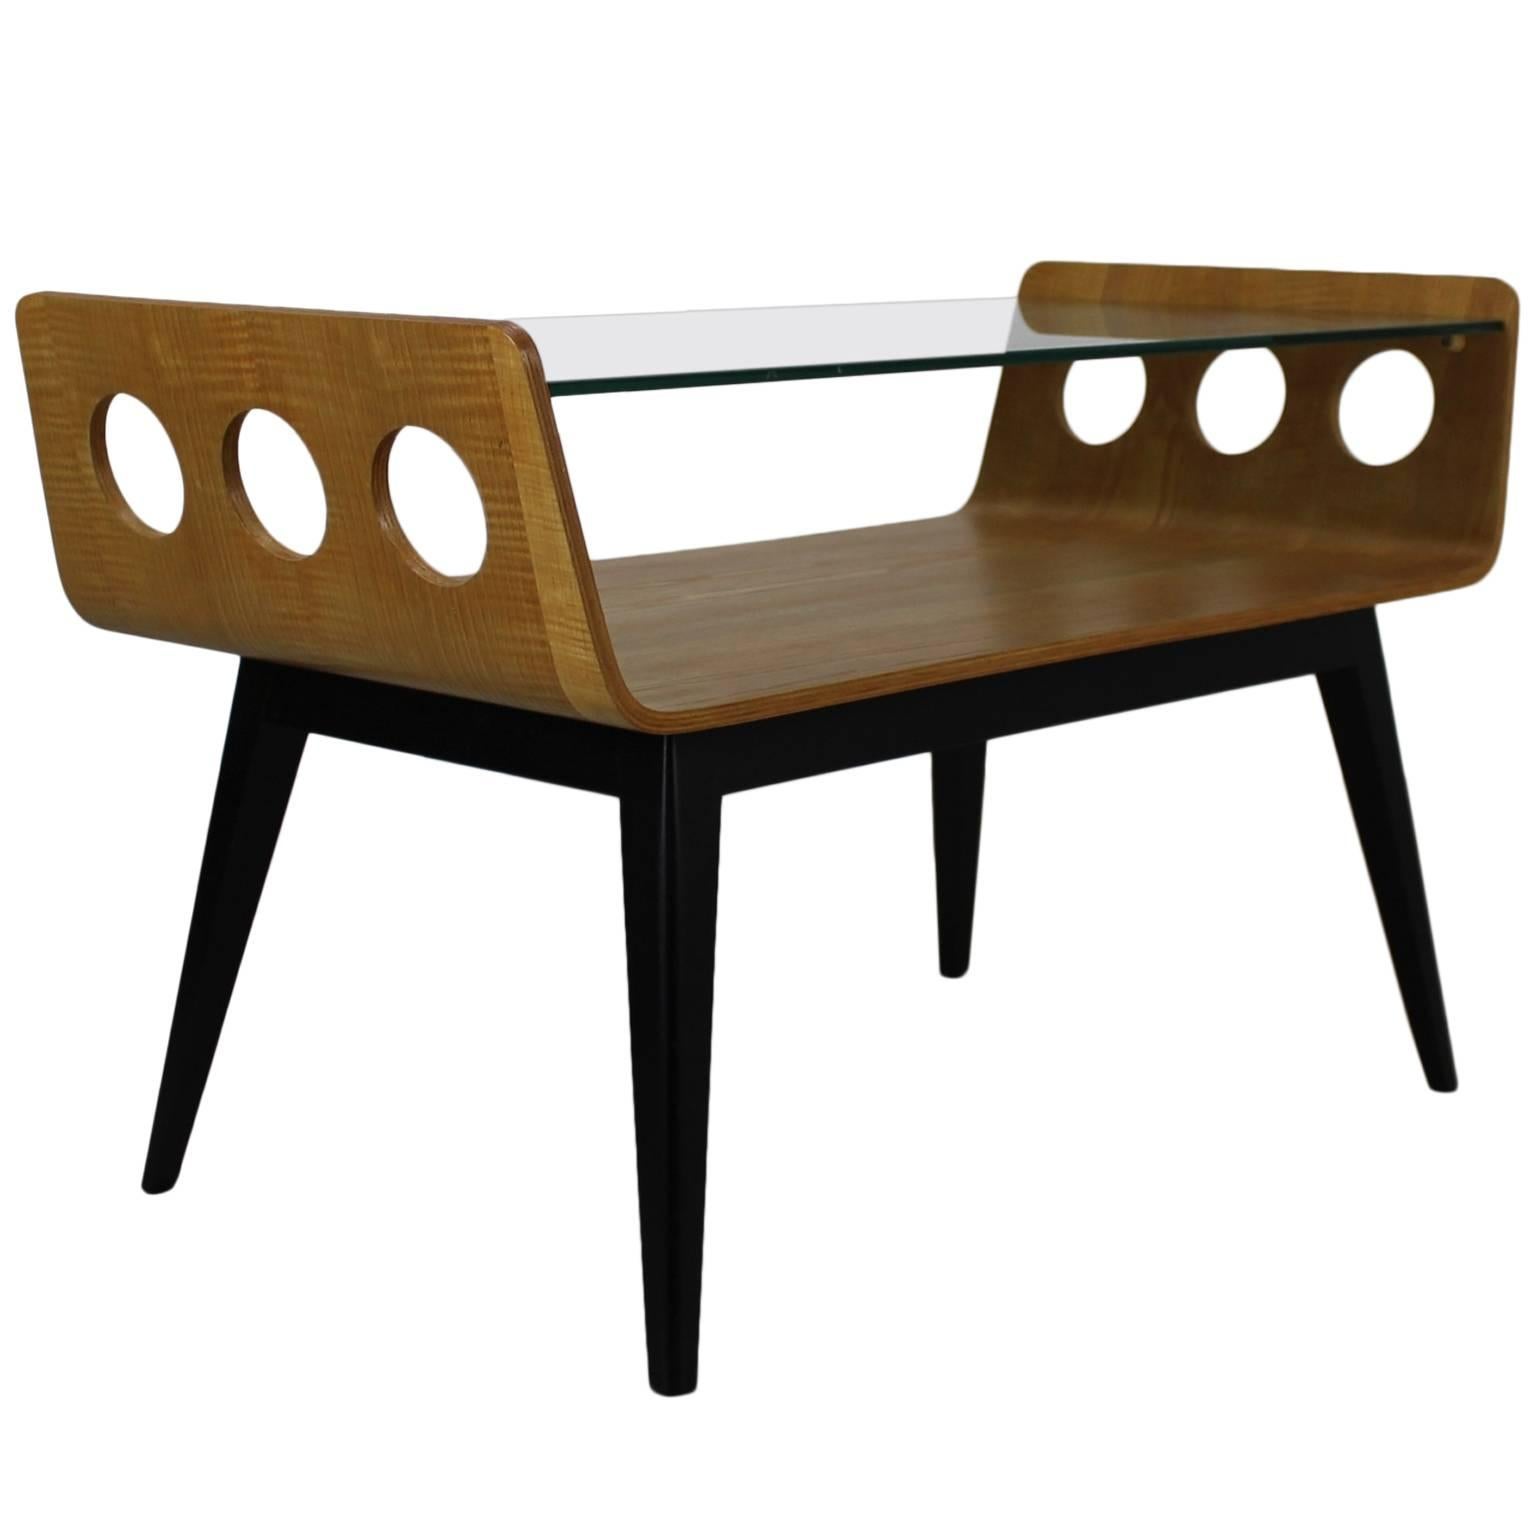 Dutch Design 1950s Bentwood Coffee Table with Glass Top For Sale